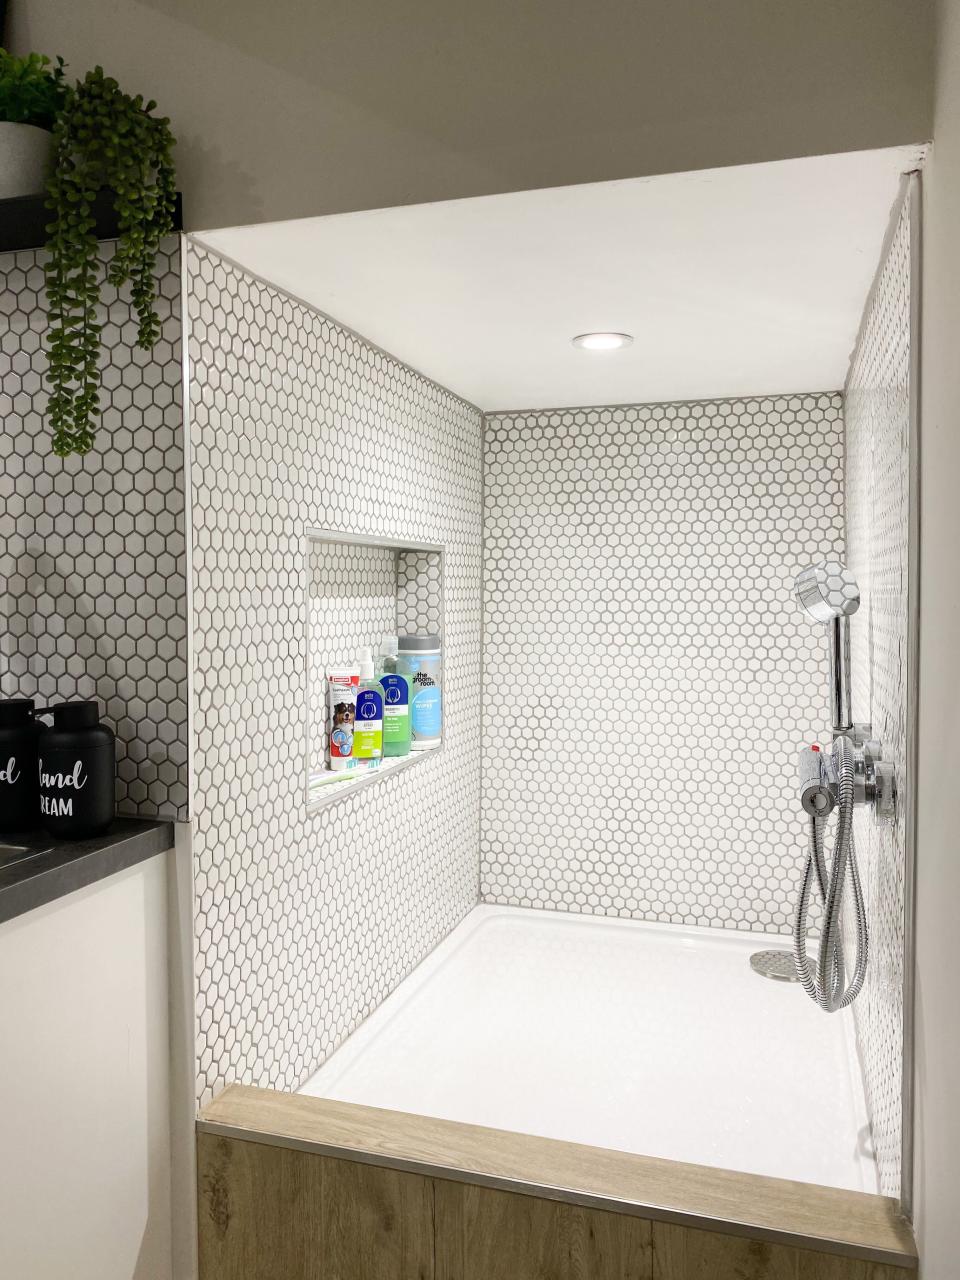 A close up of the shower space. (@homestuffonly and Drench)